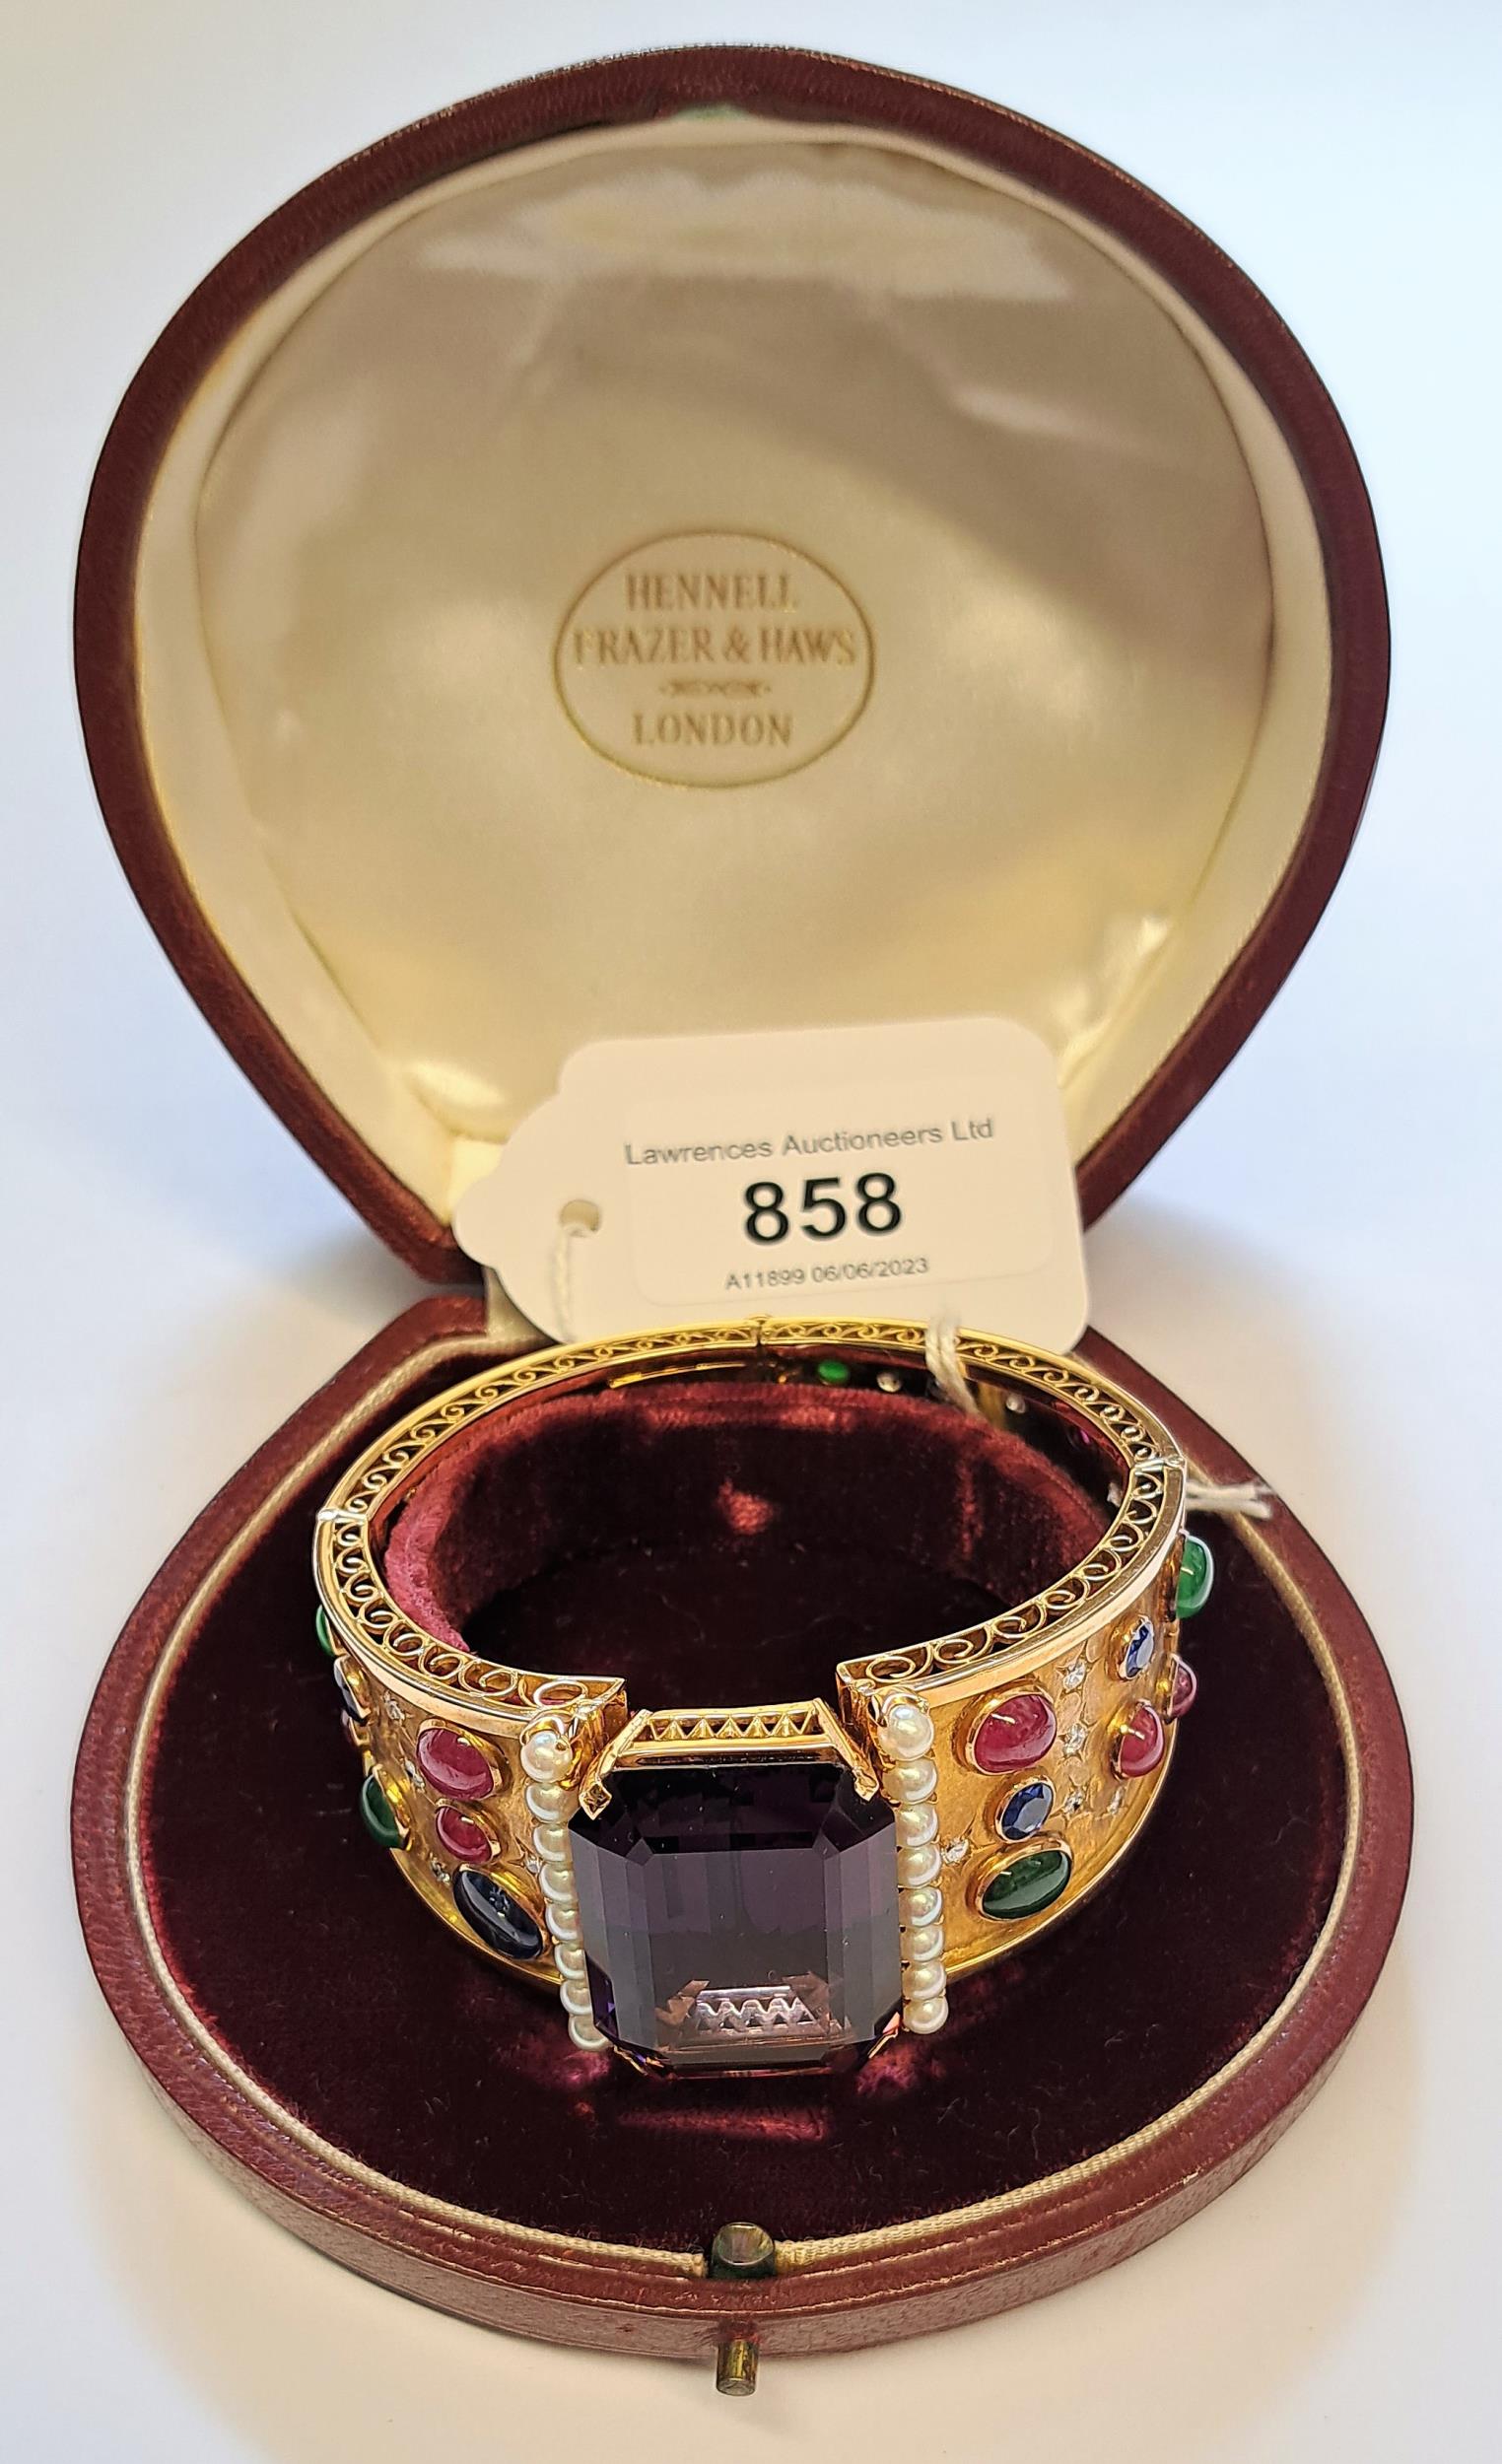 Fine mid 20th Century 14ct gold articulated bangle by Hennell Frazer & Haws, London, the centre - Image 2 of 9